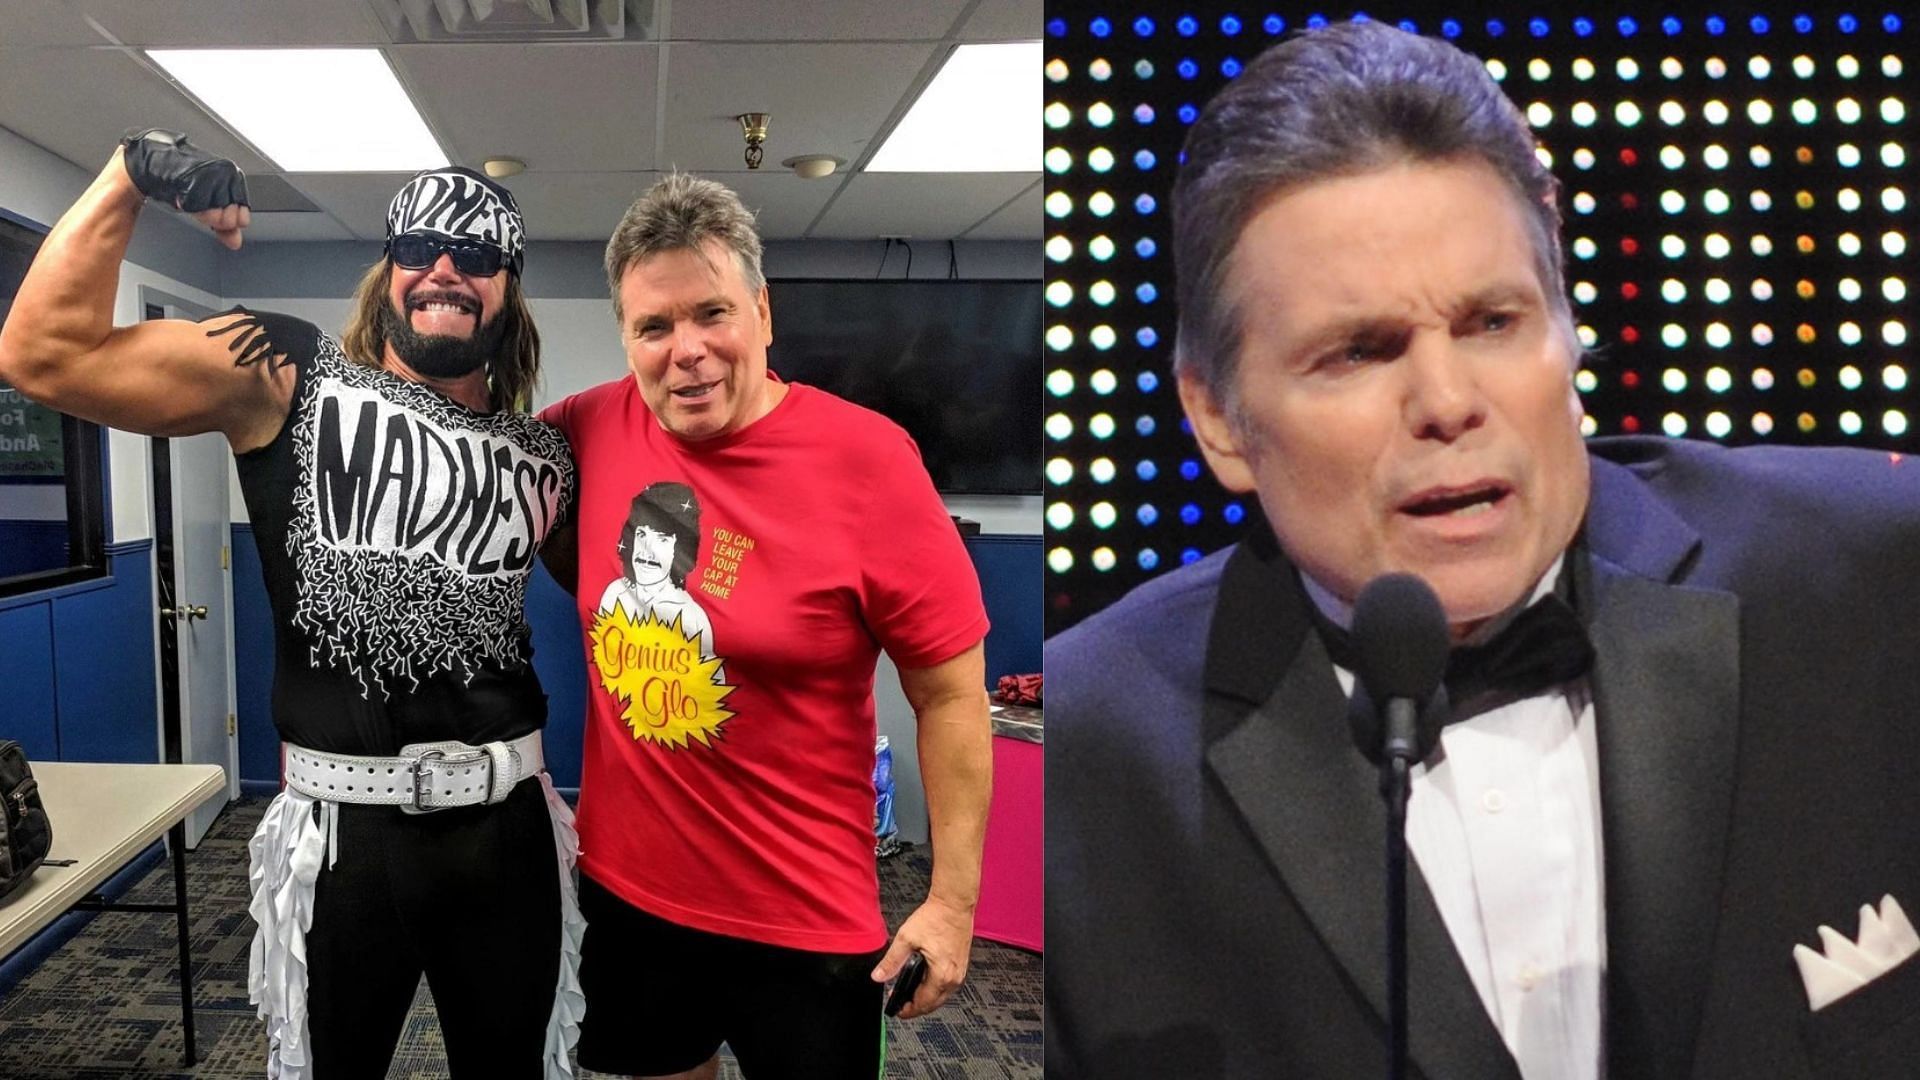 WWE legend Lanny Poffo came from a wrestling family